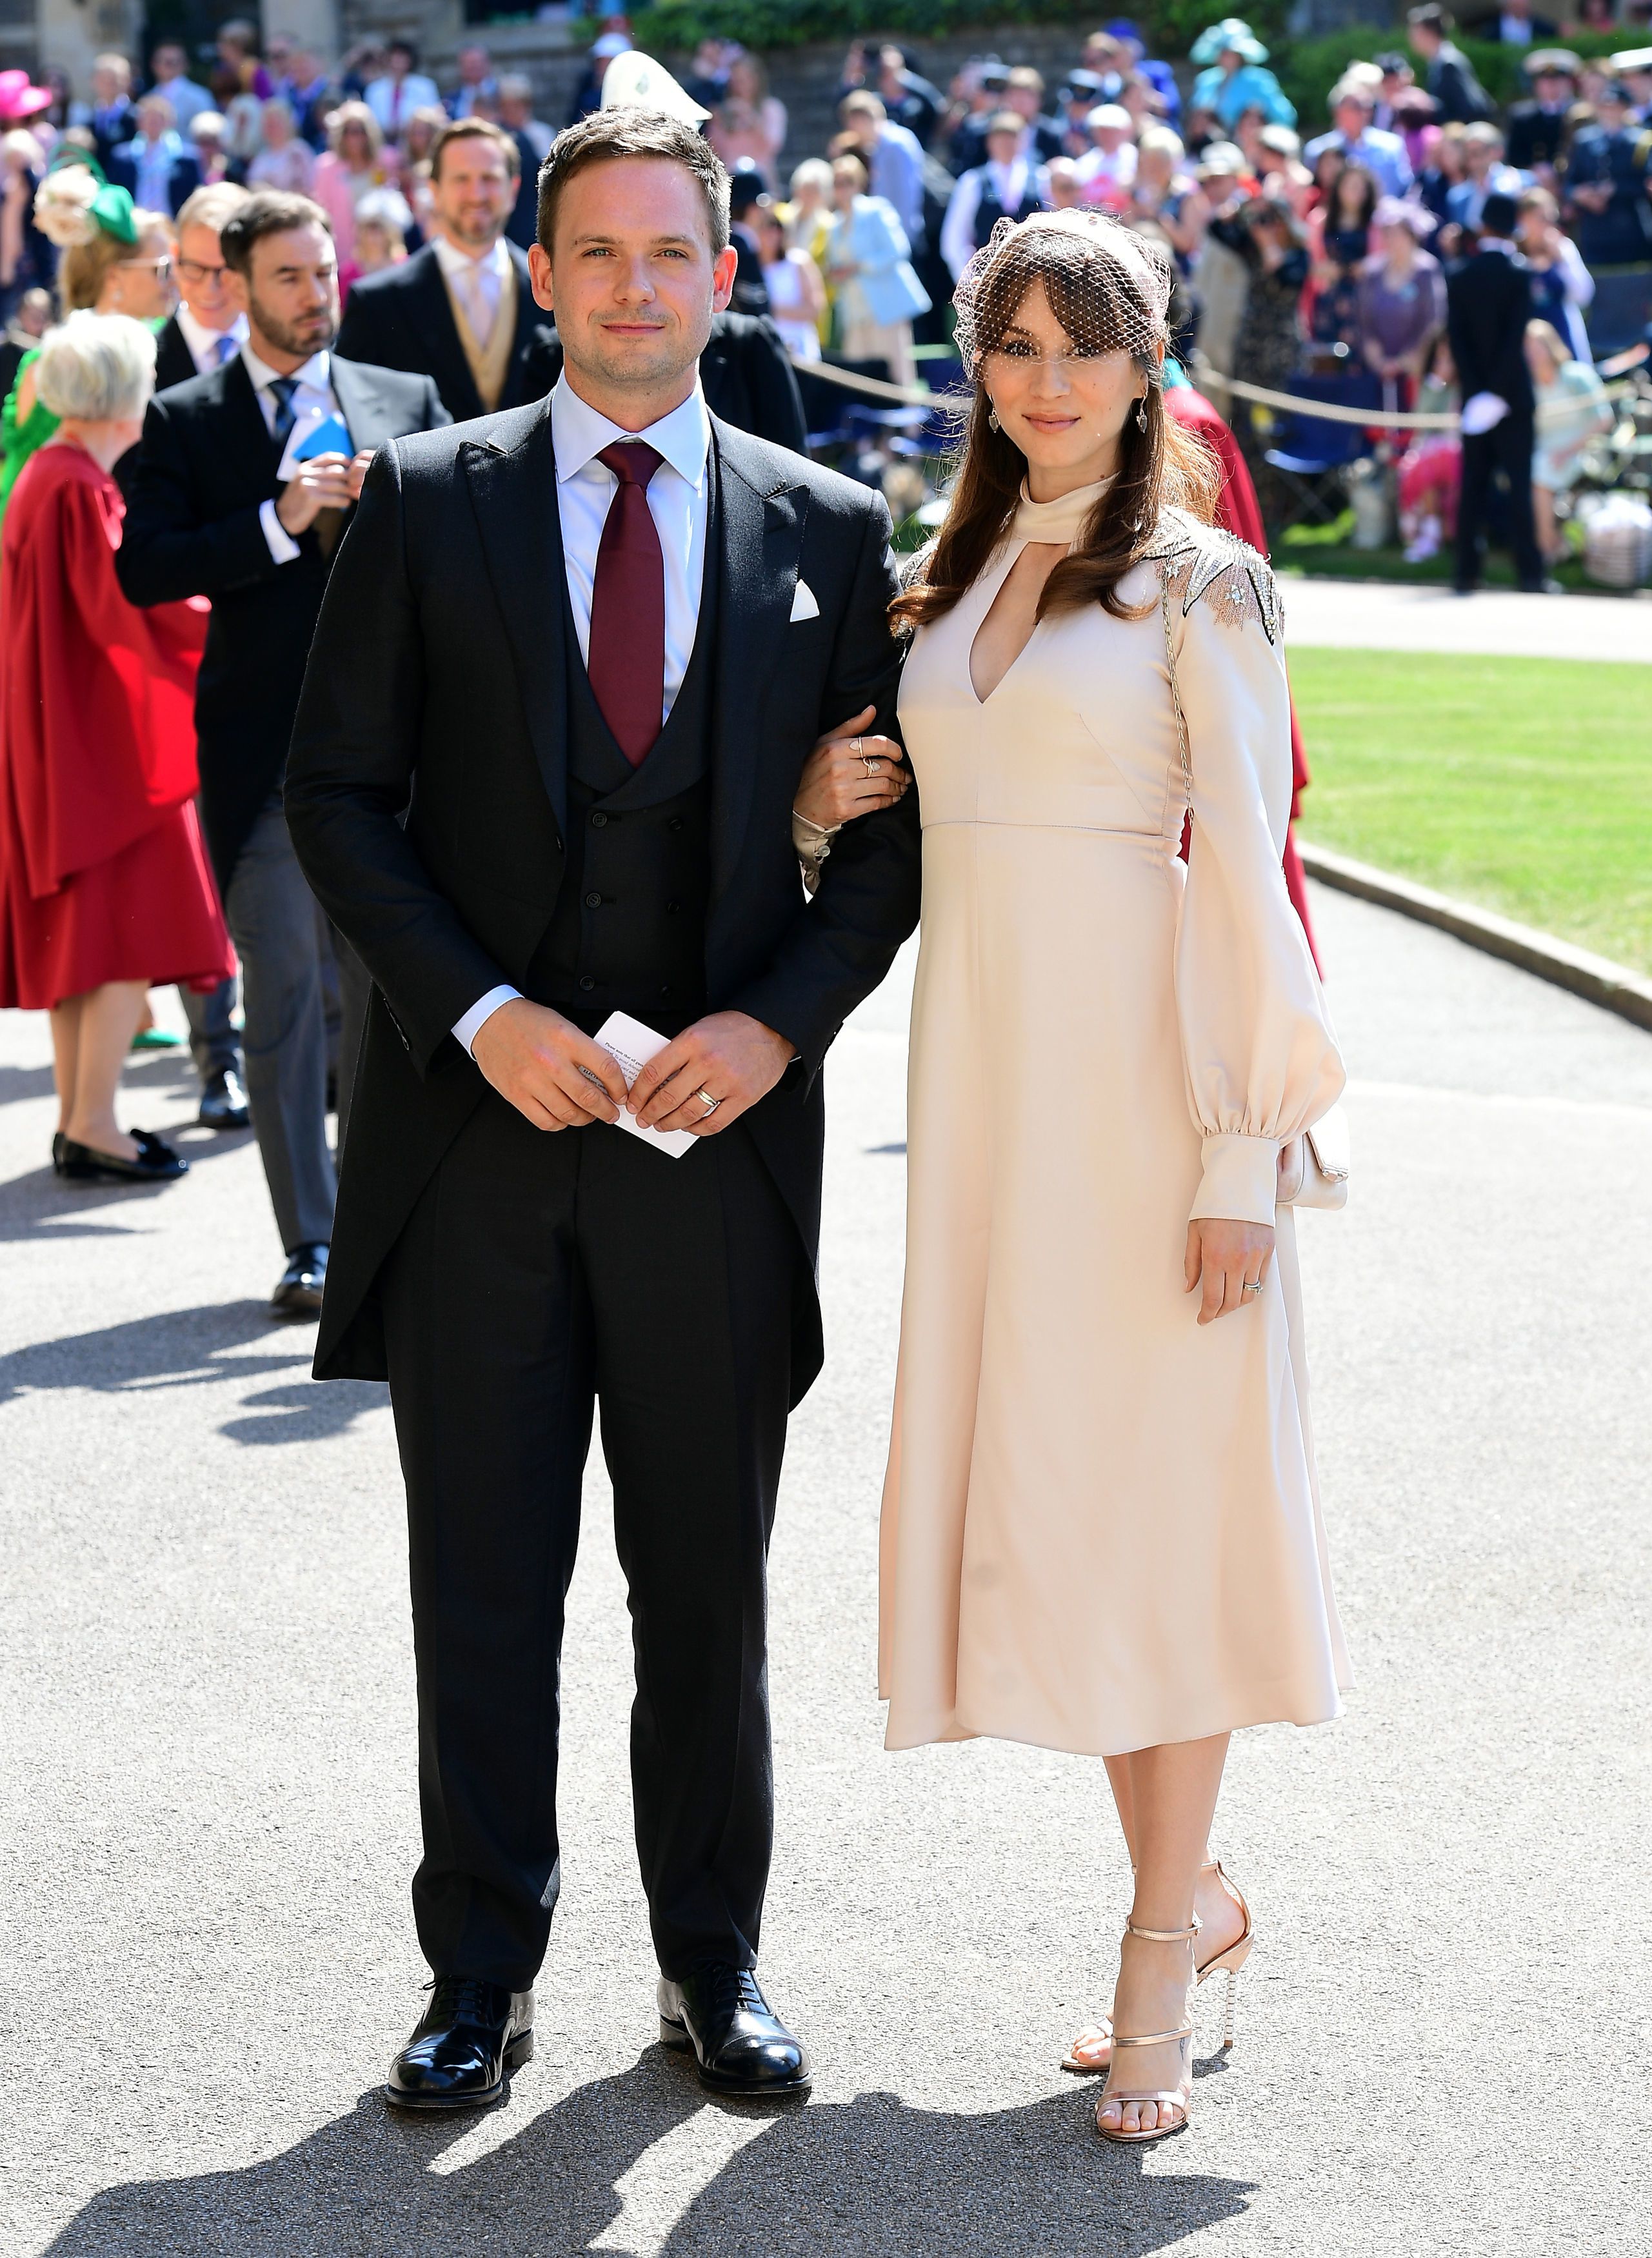 Photos of the Suits Cast at the Royal Wedding Photos of Patrick Adams